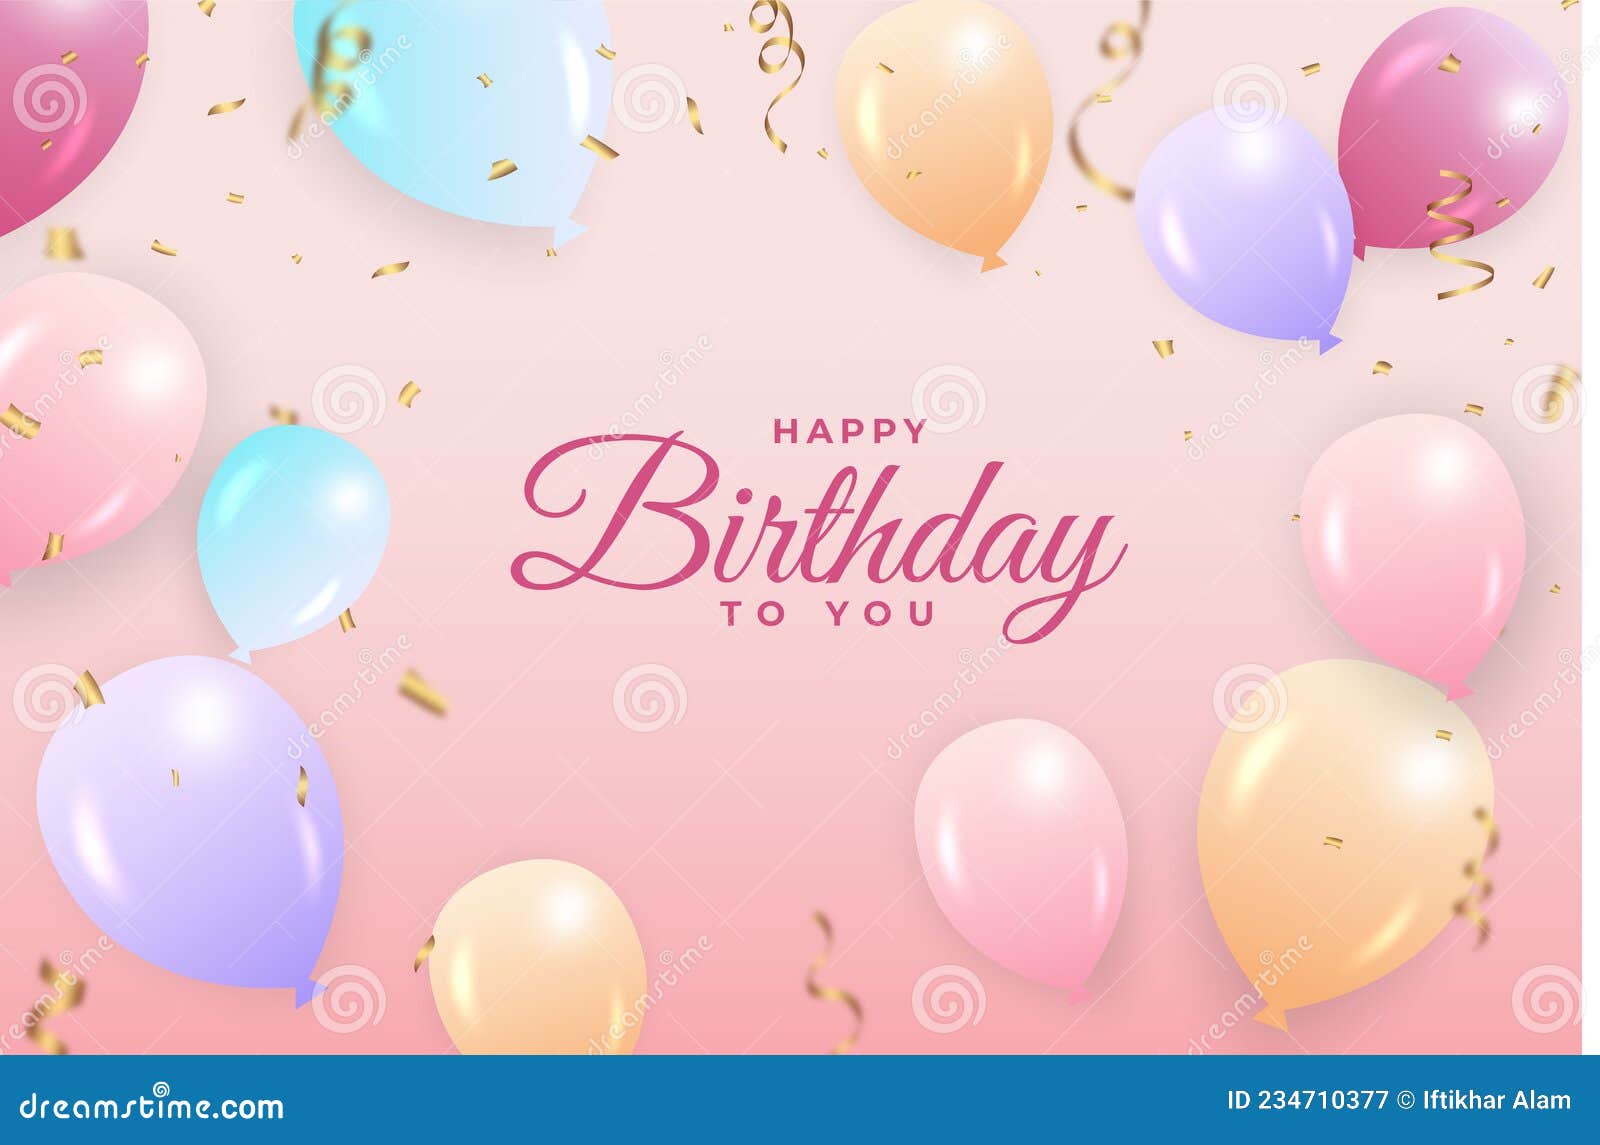 Happy Birthday with Pink Background and Gold Confetti. Birthday Background  with Colorful Balloons Stock Vector - Illustration of colorful, greeting:  234710377